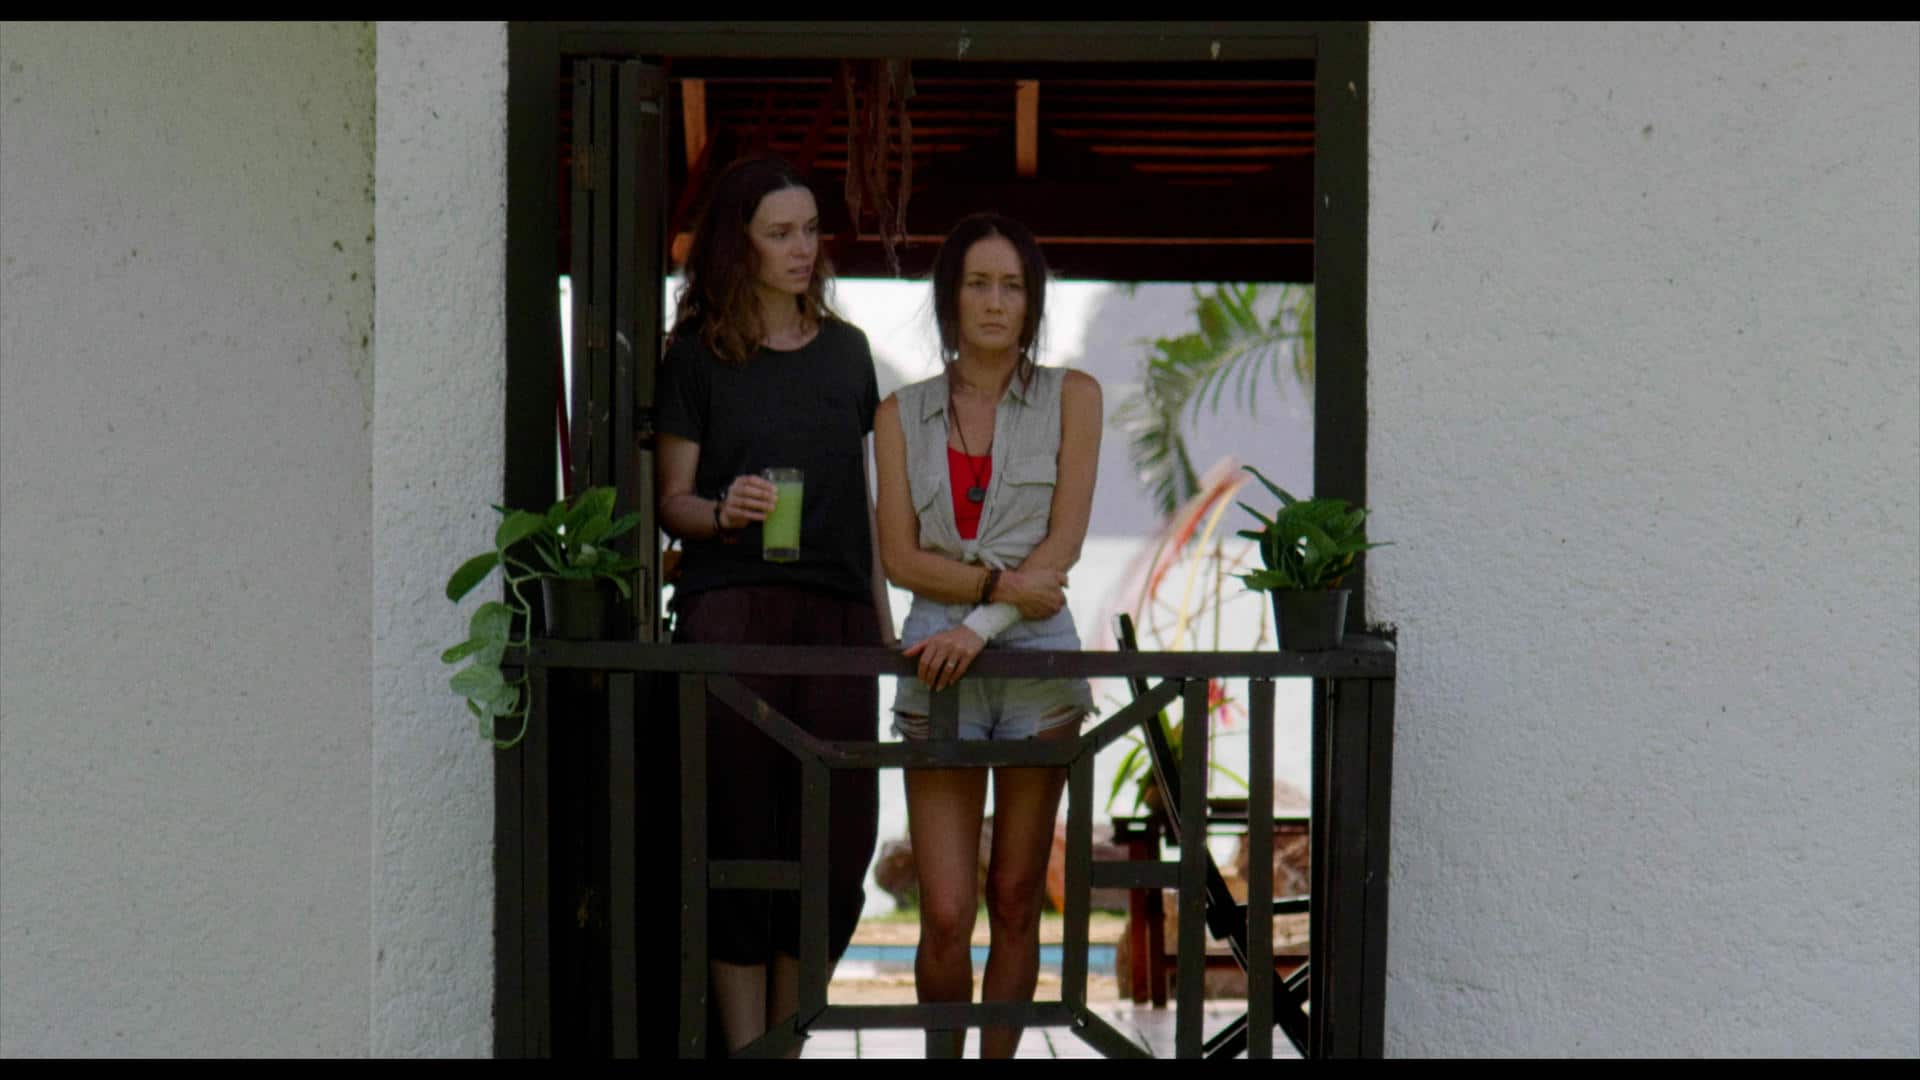 (L-R) Alex Essoe as Samantha and Maggie Q as Christine in the horror / thriller, “DEATH OF ME,” a Saban Films release. Photo Courtesy of Saban Films. 